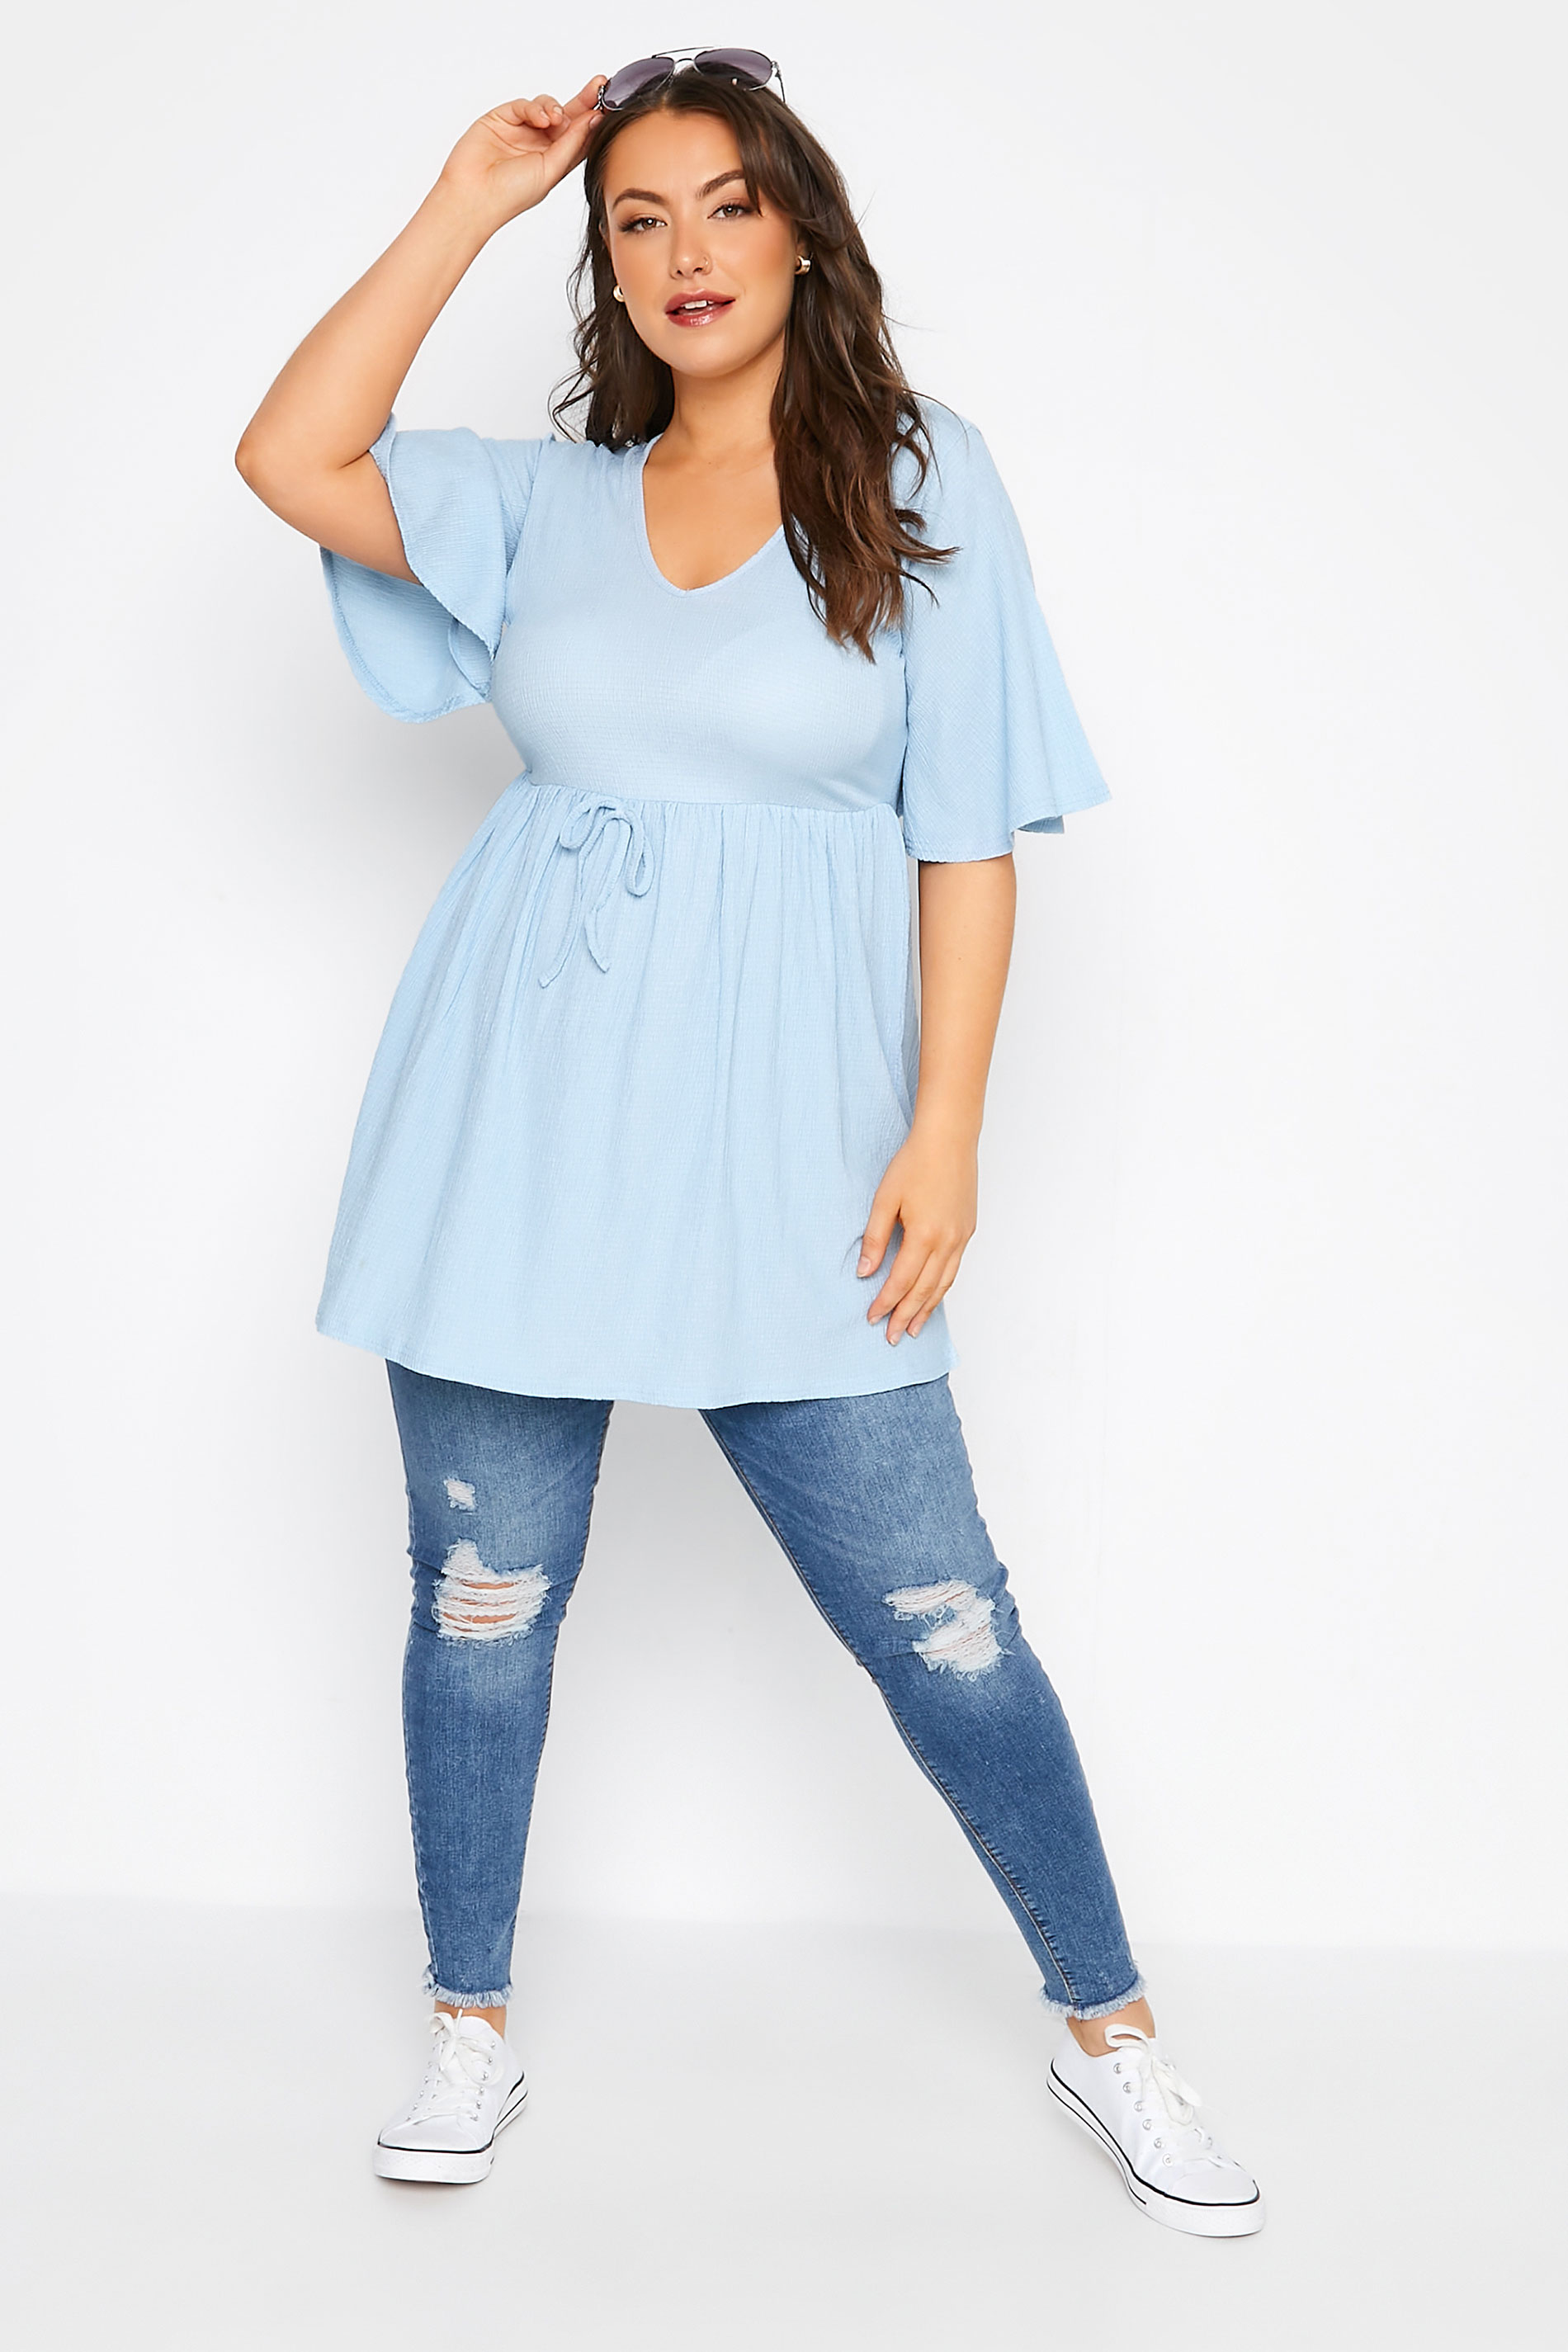 Grande taille  Tops Grande taille  Tops Casual | LIMITED COLLECTION - Top Bleu Ciel Manches Courtes Ficelle - ZX66275